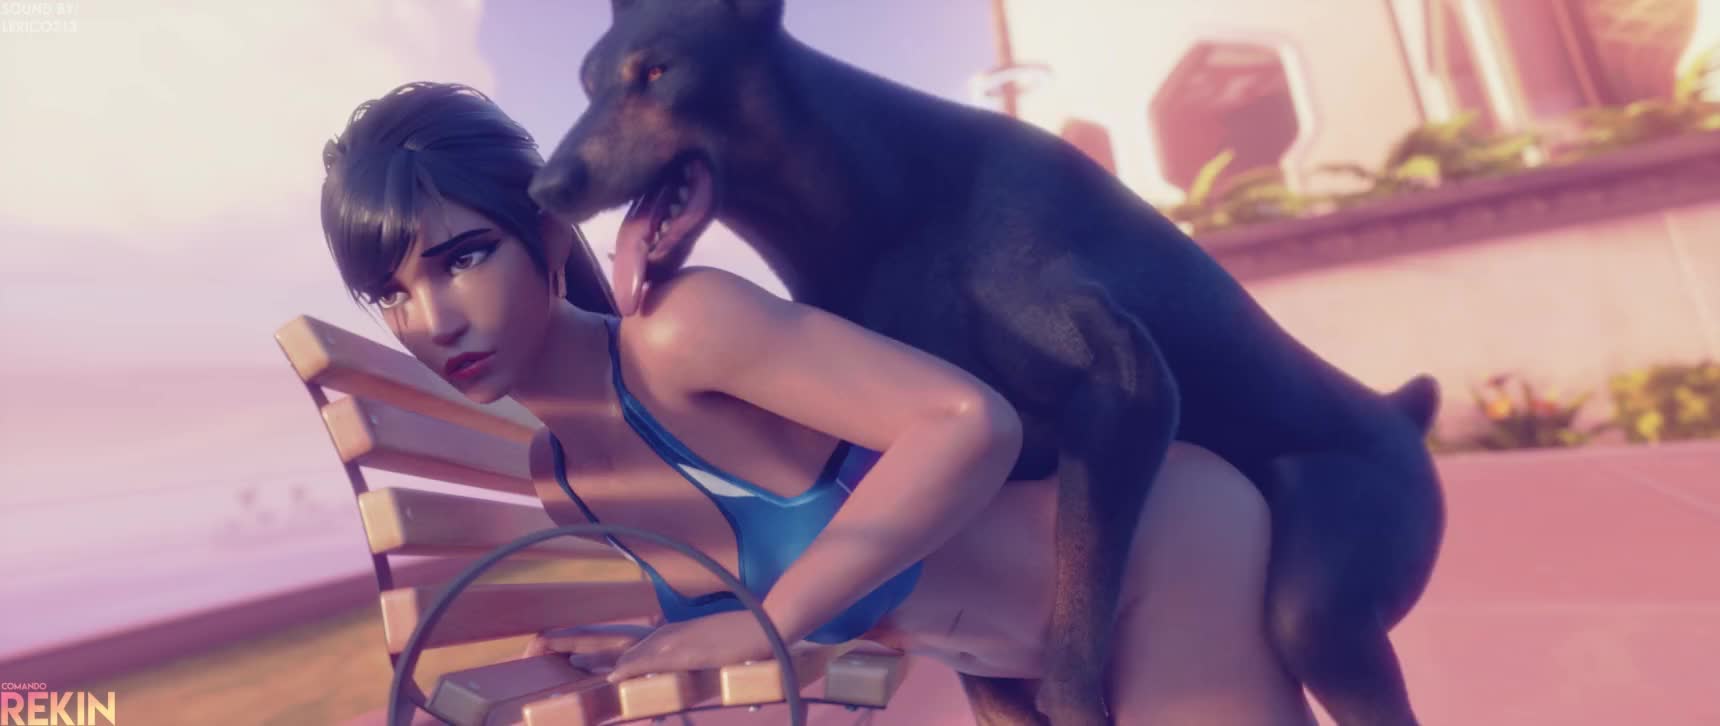 Pharah Gets Huge Dick From Behind By Dog – Overwatch NSFW animation thumbnail